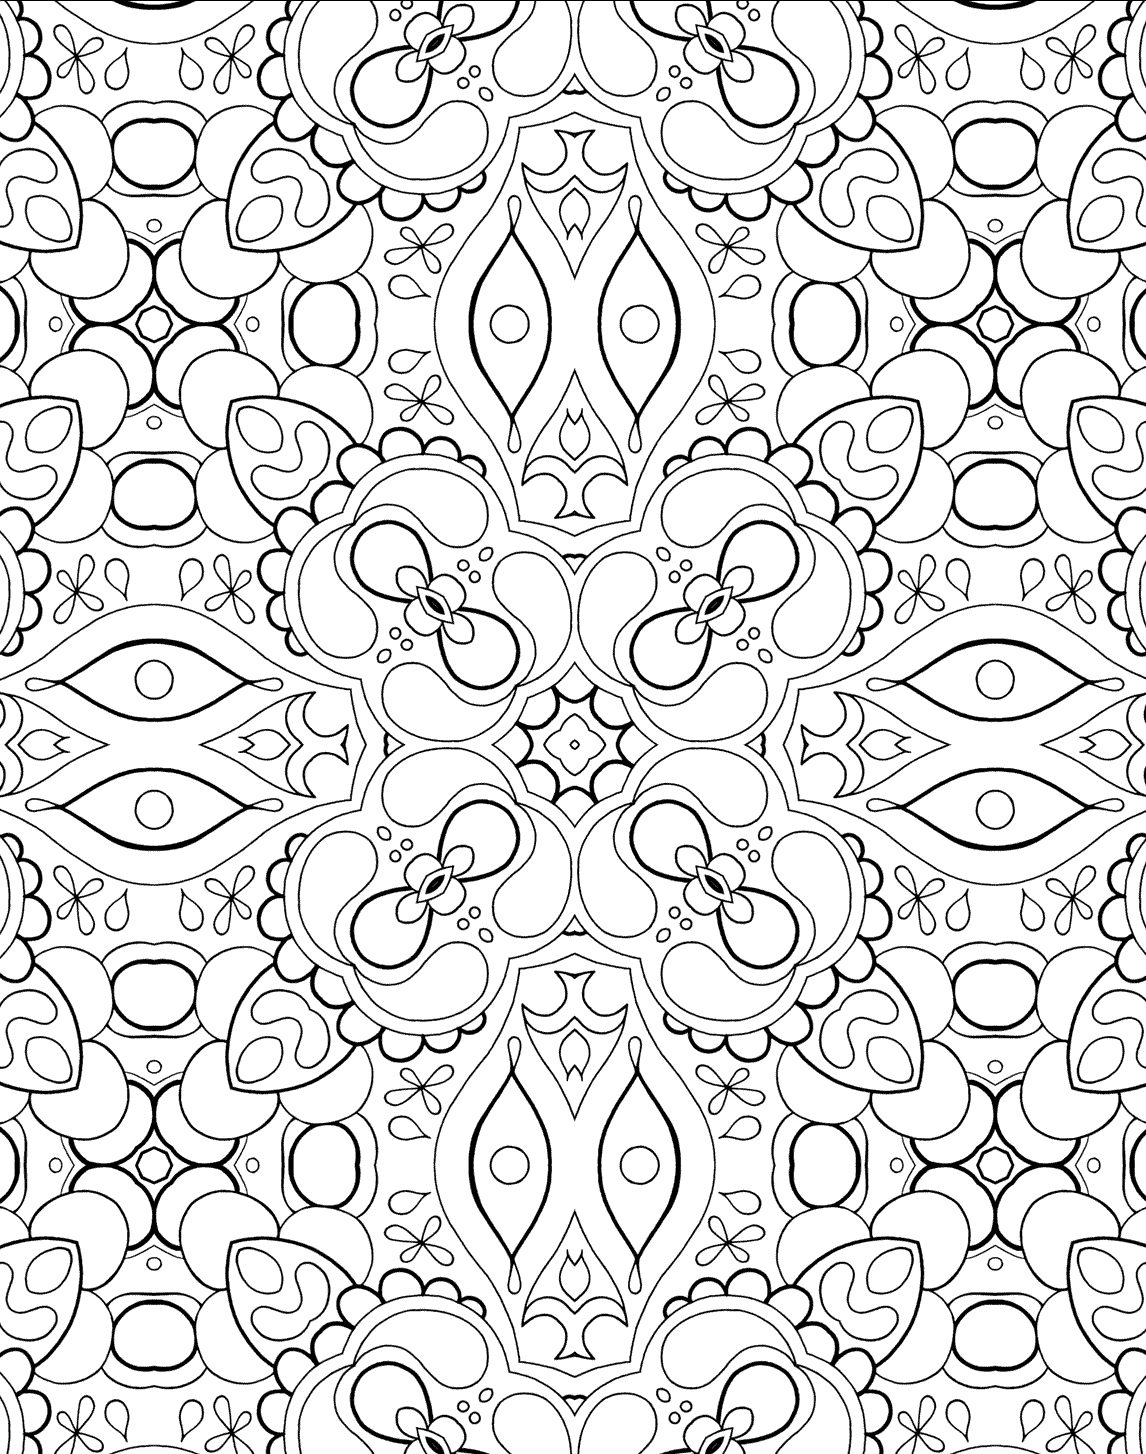 Mindfulness Coloring Pages Adult Free Mindfulness Design Printable 2020 645 Coloring4free